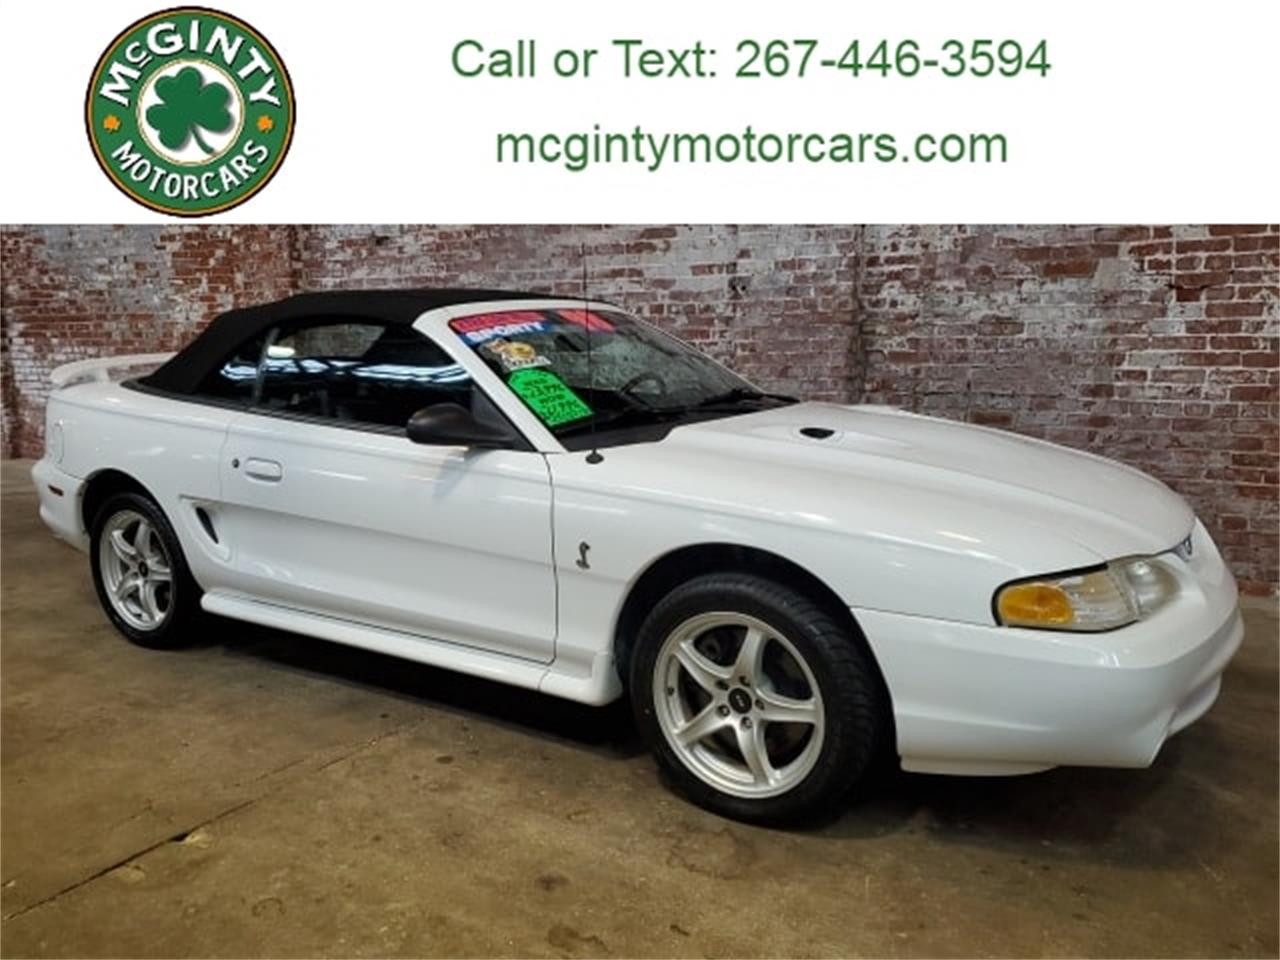 For Sale: 1998 Ford Mustang in Reading, Pennsylvania for sale in Reading, PA